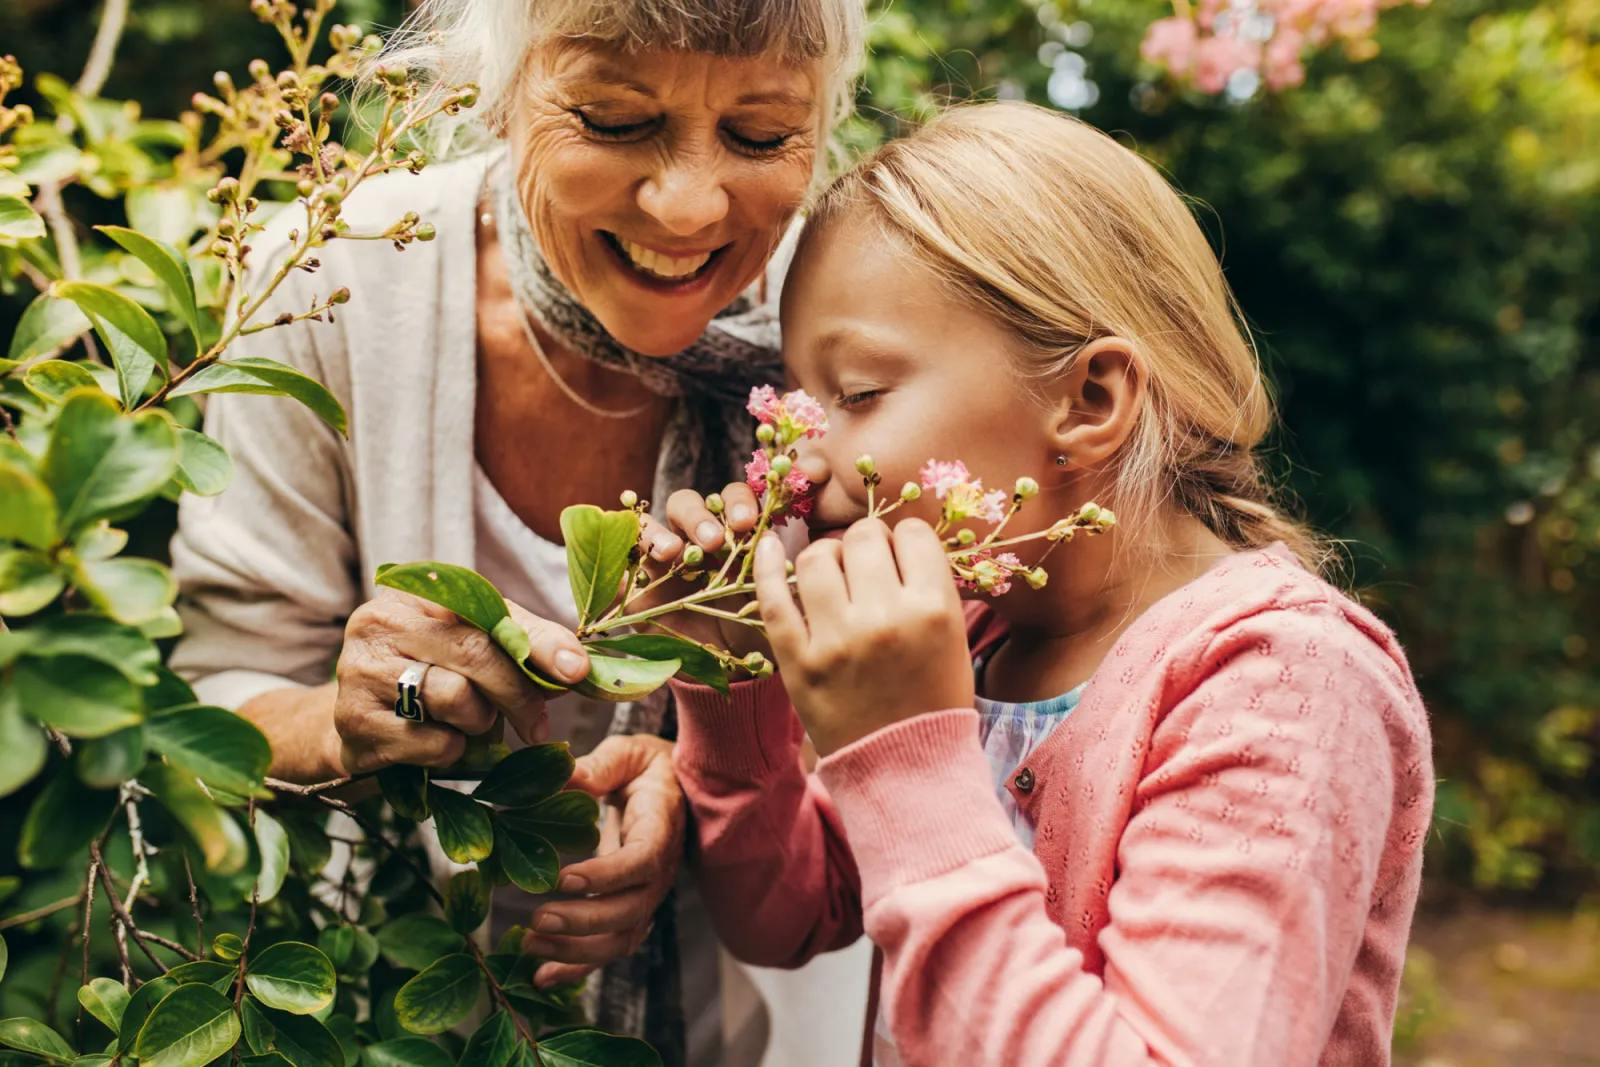 Smiling grandmother and granddaughter smelling flowers in garden